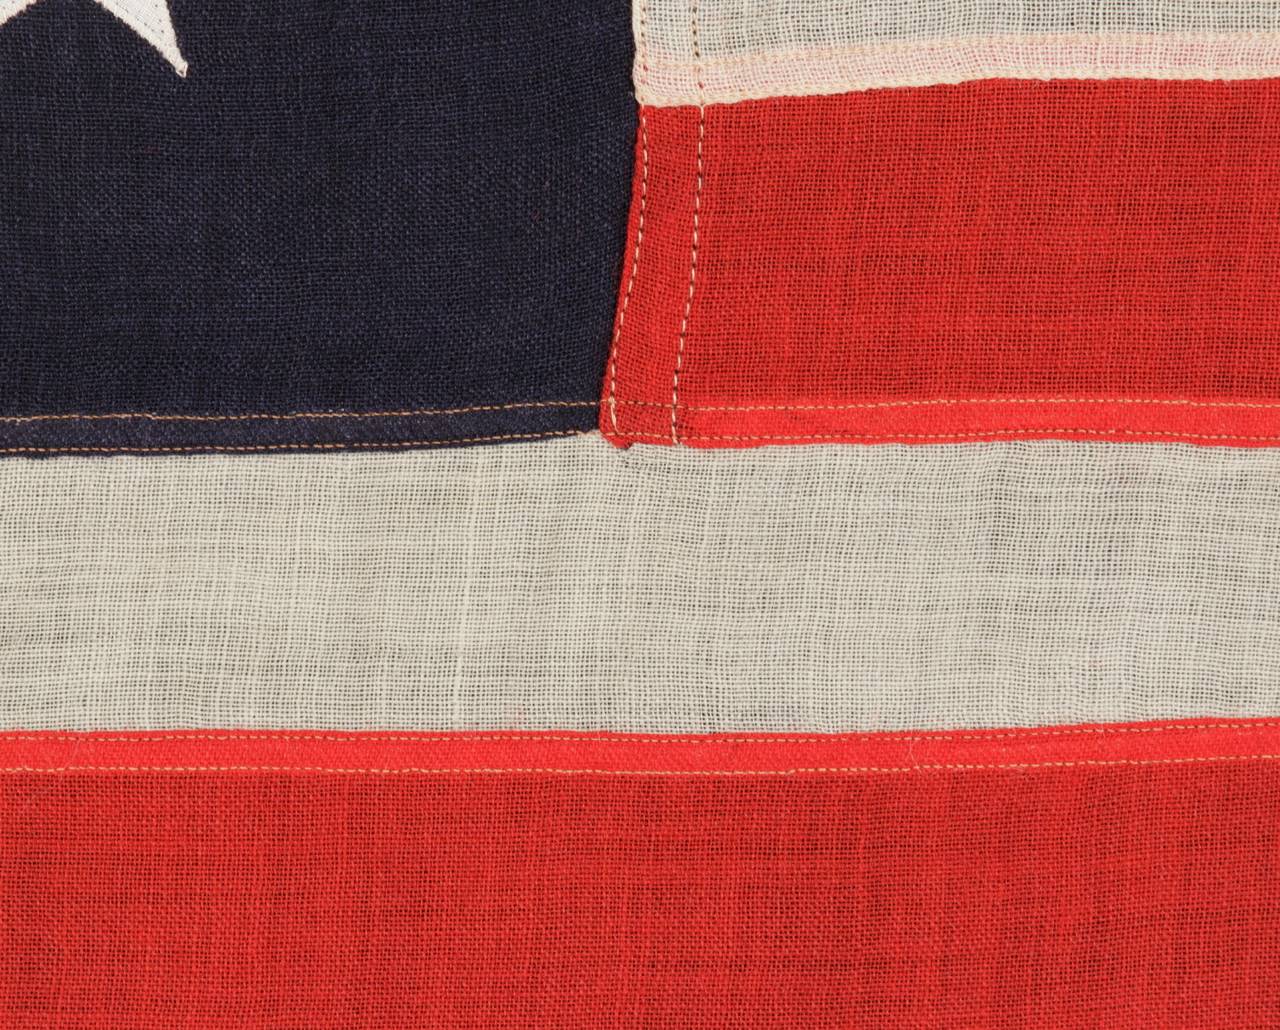 19th Century 13-Star, Small Scale Flag